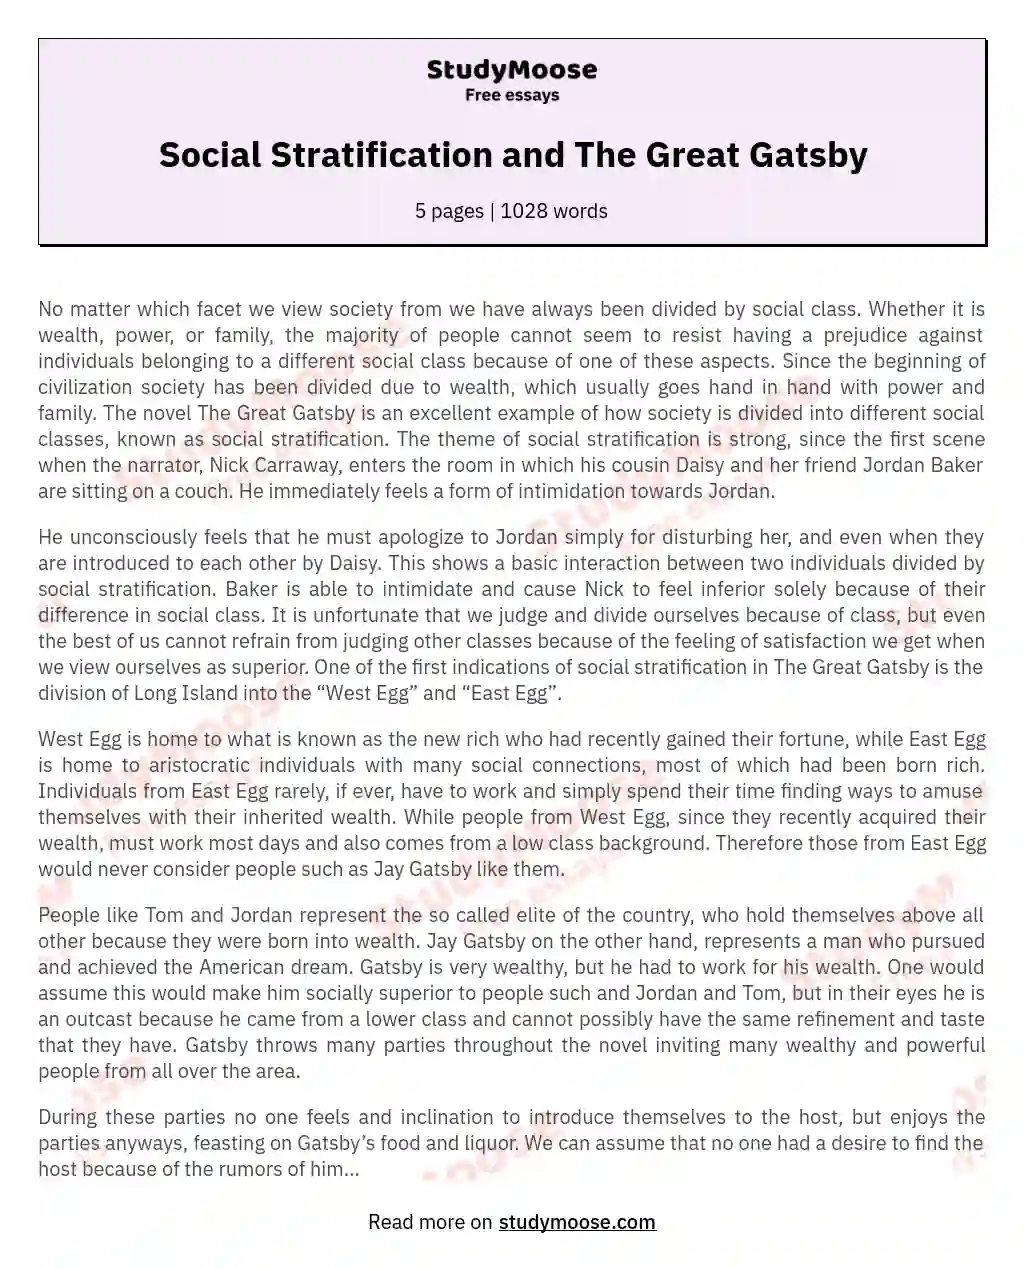 Social Stratification and The Great Gatsby essay